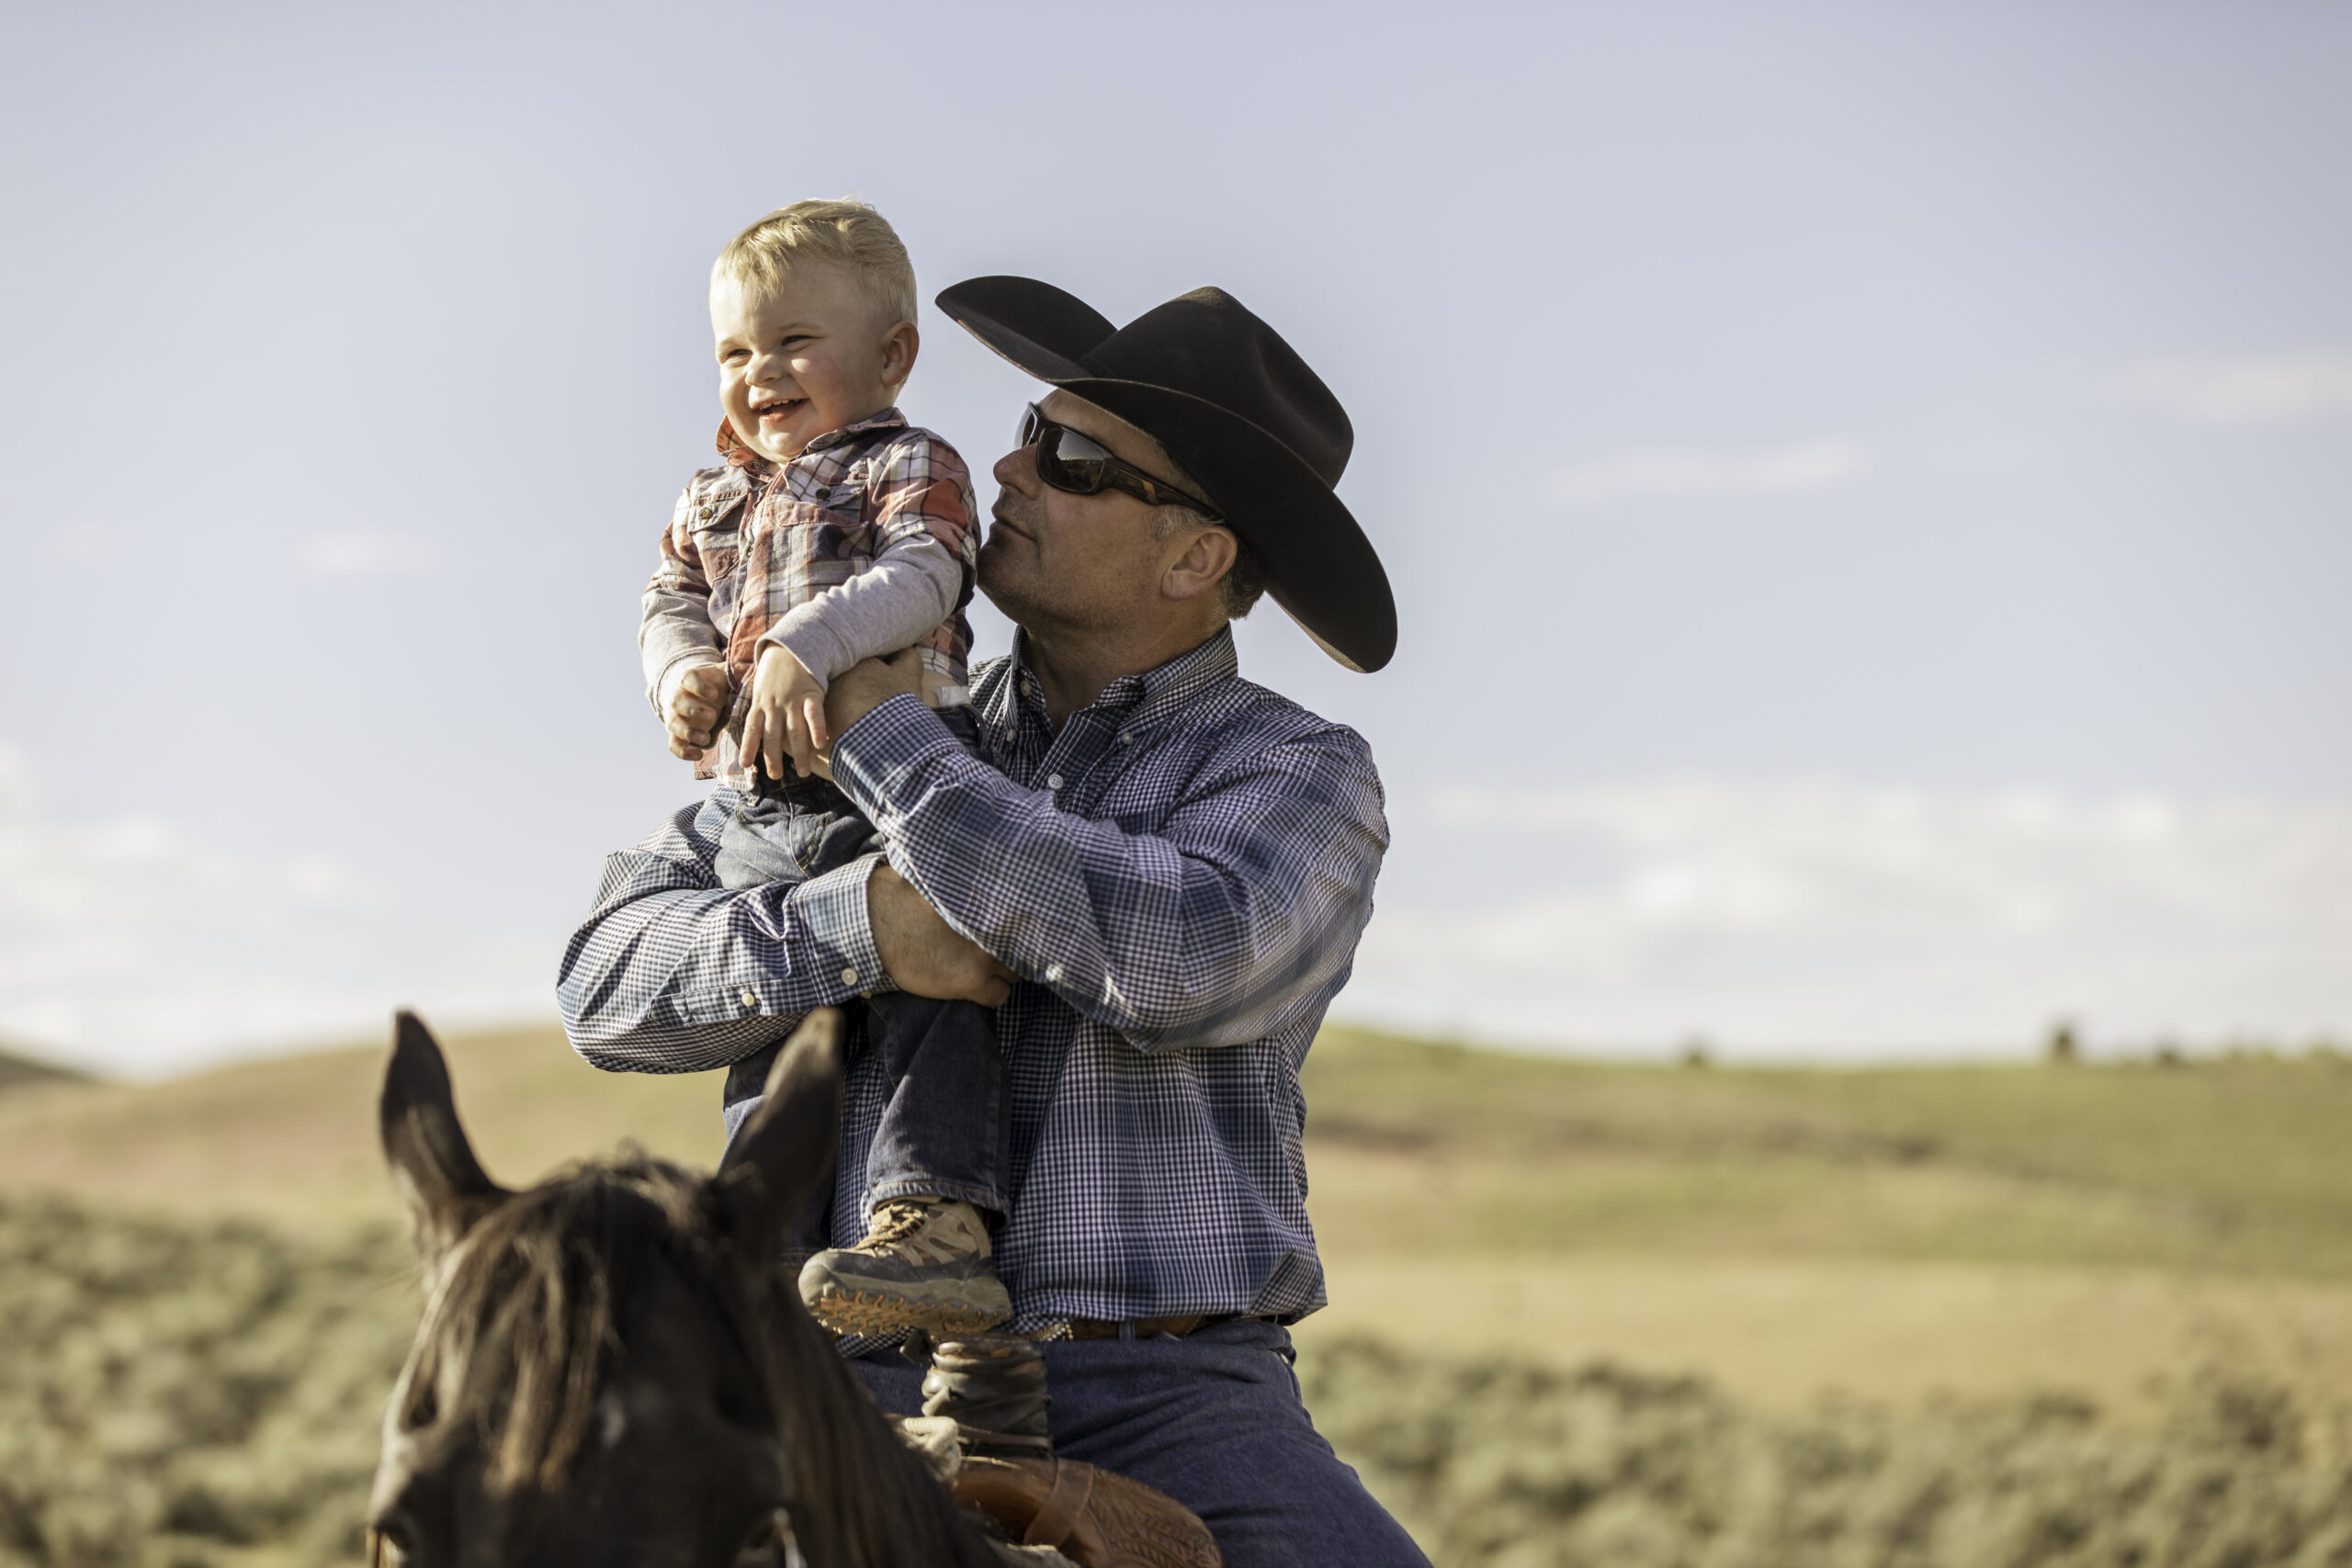 Stock photo of a father and son on horseback in the Utah countryside.